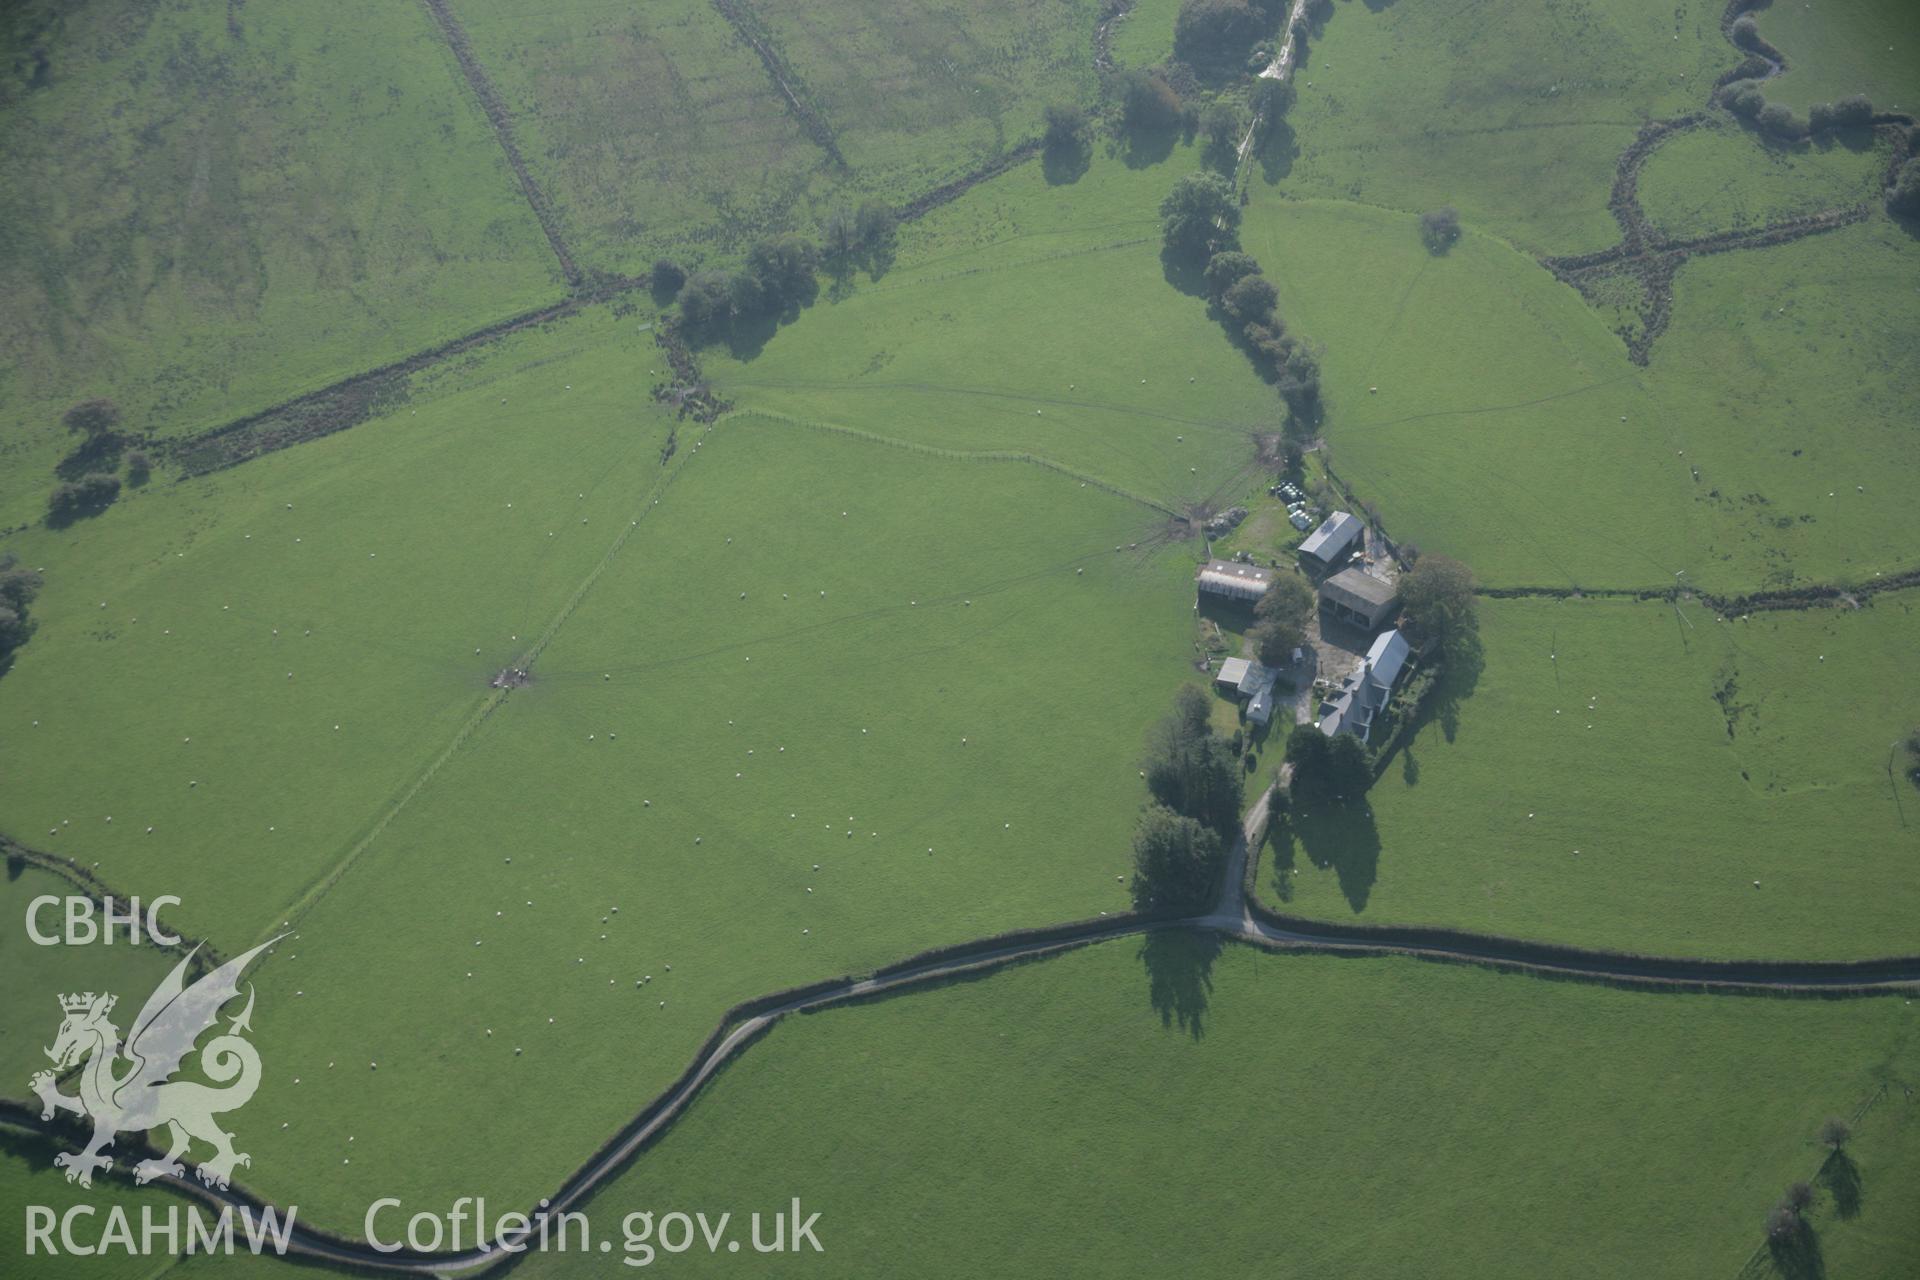 RCAHMW colour oblique aerial photograph of Cefn Caer Roman Fort, Pennal, from the north-east. Taken on 17 October 2005 by Toby Driver